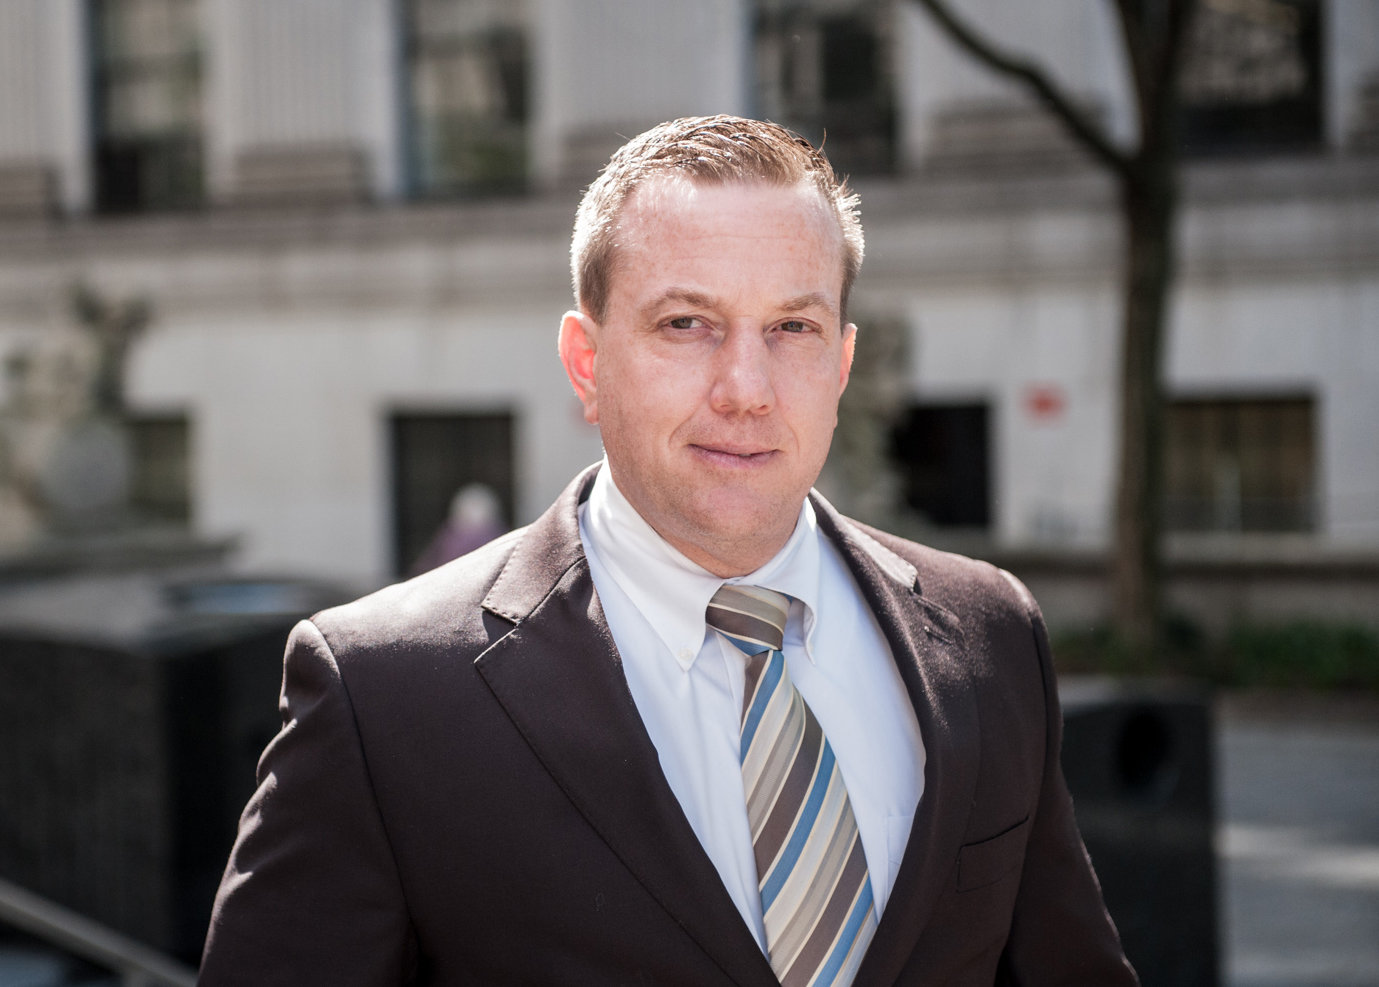 COP IN A JACKPOT: Former NYPD Deputy Inspector James Grant has been accused by Jona Rechnitz of providing special access and other favors to him and his former business partner, Jeremy Reichberg, in return for their paying for expensive trips and meals and gifts for him and his family. His chief defense attorney, John Meringolo, clashed with a Federal prosecutor after allegedly calling Mr. Rechnitz ‘a disgrace’ as the main witness in the criminal trial walked past him outside the courtroom Nov. 27.